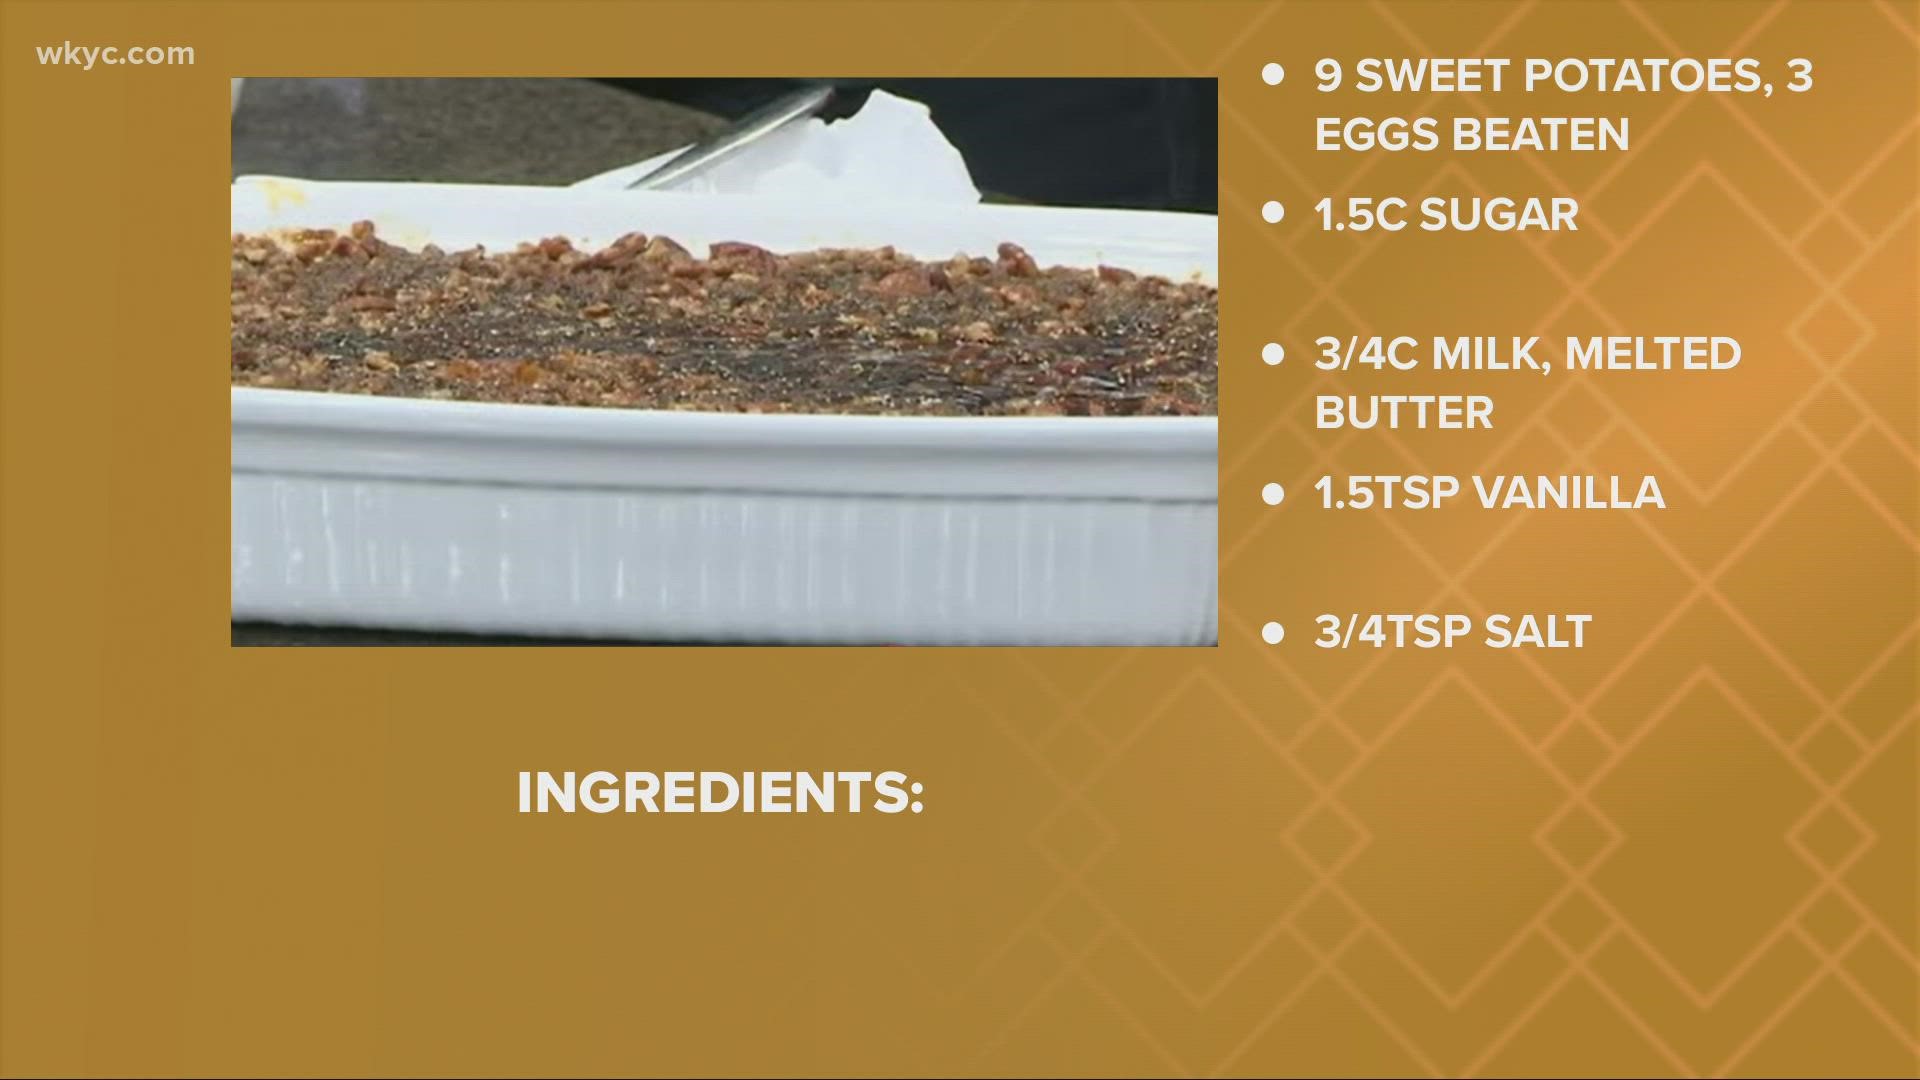 Looking to make a great sweet potato casserole for Thanksgiving? Let Jay's wife tell you how!